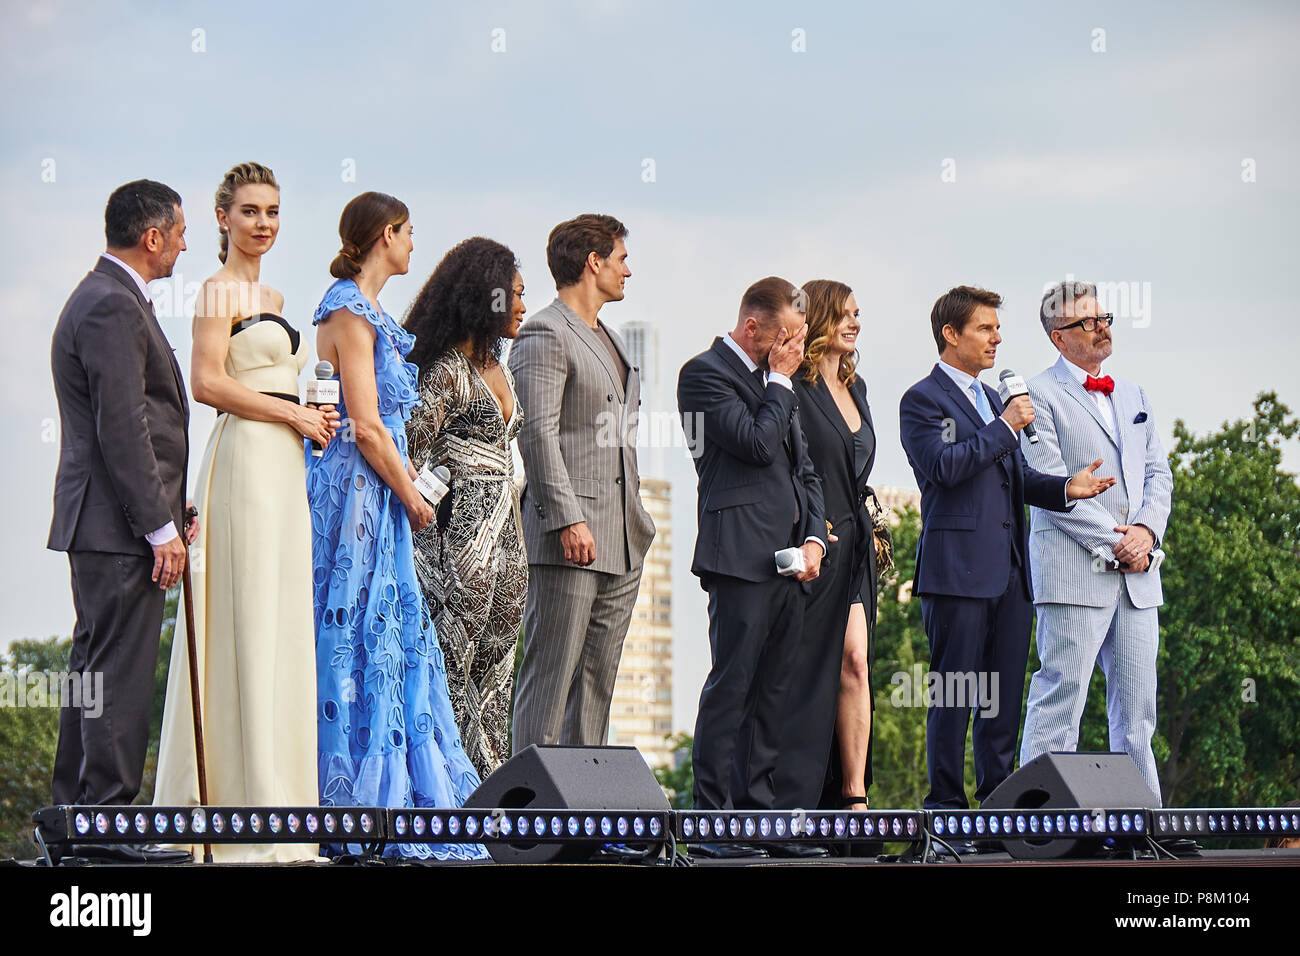 Paris, France. 12 July 2018. Director and Cast including Tom Cruise, Christopher McQuarrie, Rebecca Ferguson, Simon Pegg, Henry Cavill, Angela Bassett, Michelle Monaghan, Vanessa Kirby at the Mission: Impossible - Fallout World Premier red carpet. Credit: Calvin Tan/Alamy Live News Stock Photo